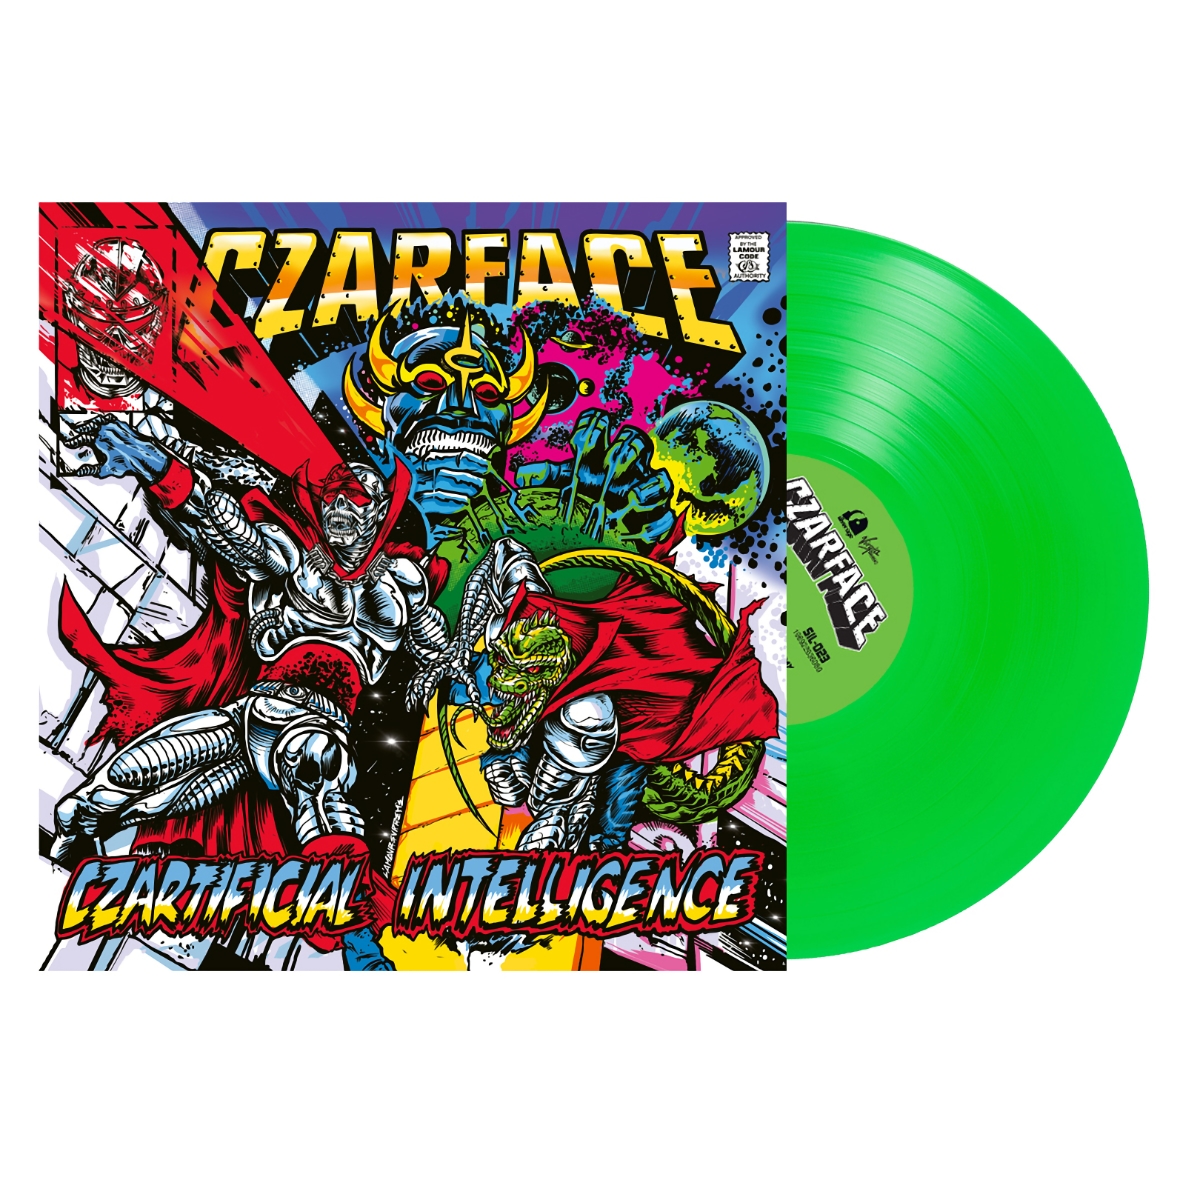 WIN! - A Vinyl Copy of Czarface's 'Czartificial Intelligence' 7L, Esoteric, and the Wu-Tang Clan’s Inspectah Deck link up once again for a thrill ride of top-tier hip hop cuts. Like and share this tweet then give us a follow to be entered. normanrecords.com/records/199943…